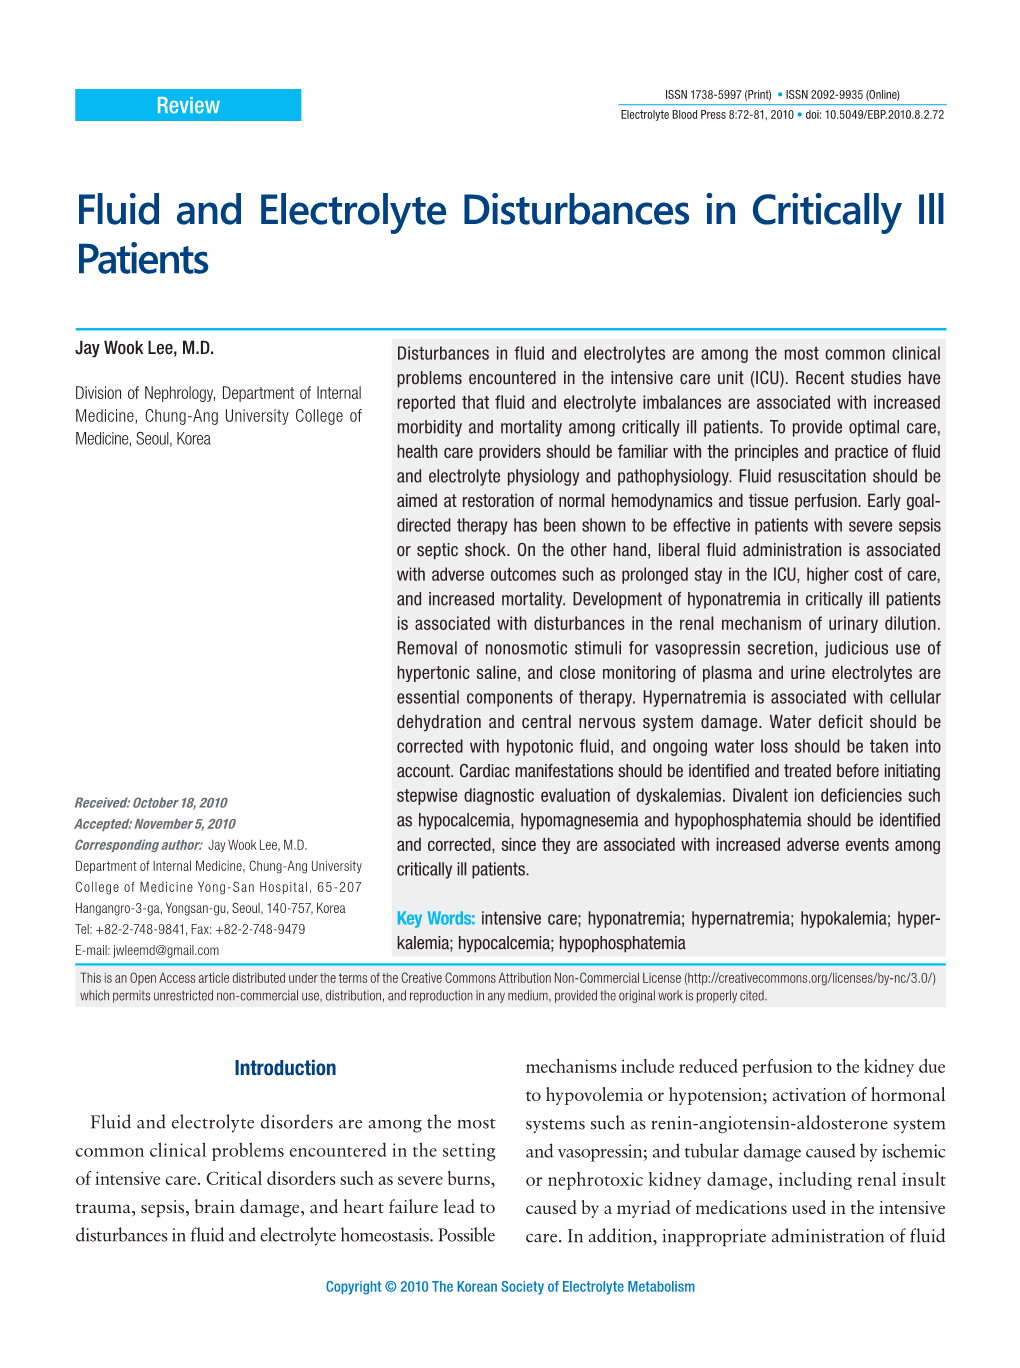 Fluid and Electrolyte Disturbances in Critically Ill Patients